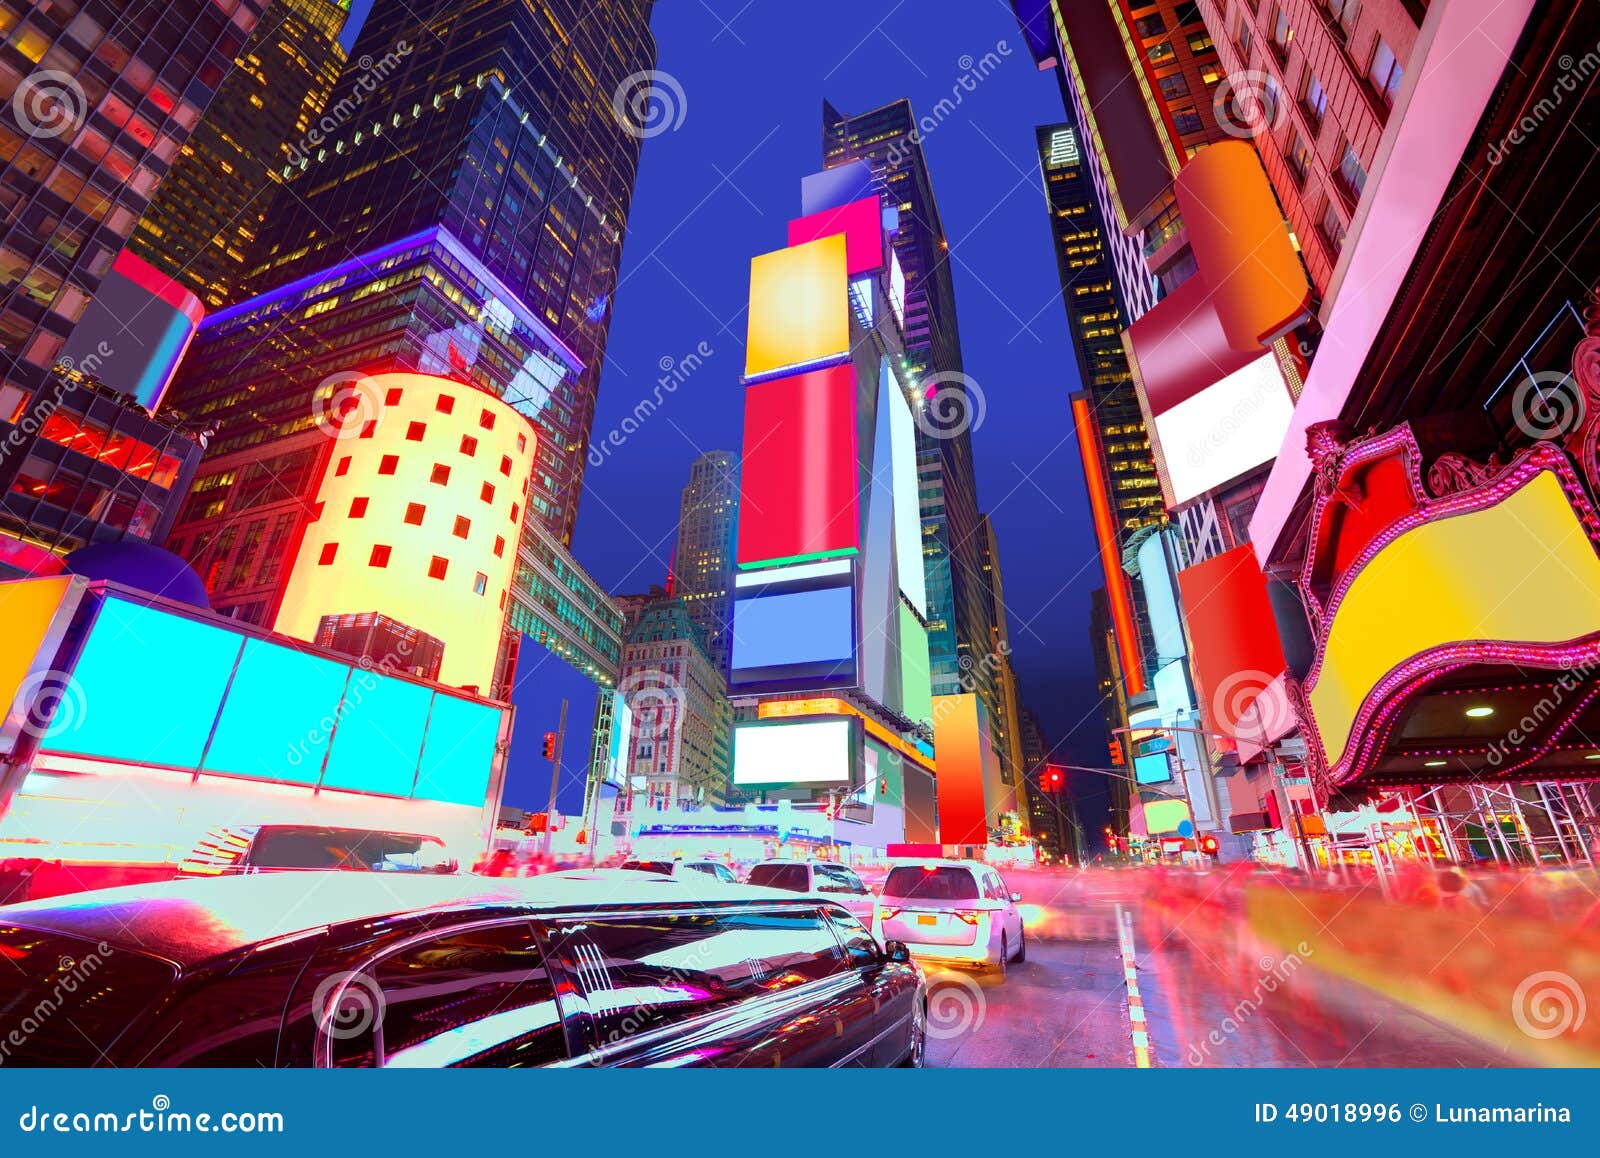 times square manhattan new york deleted ads